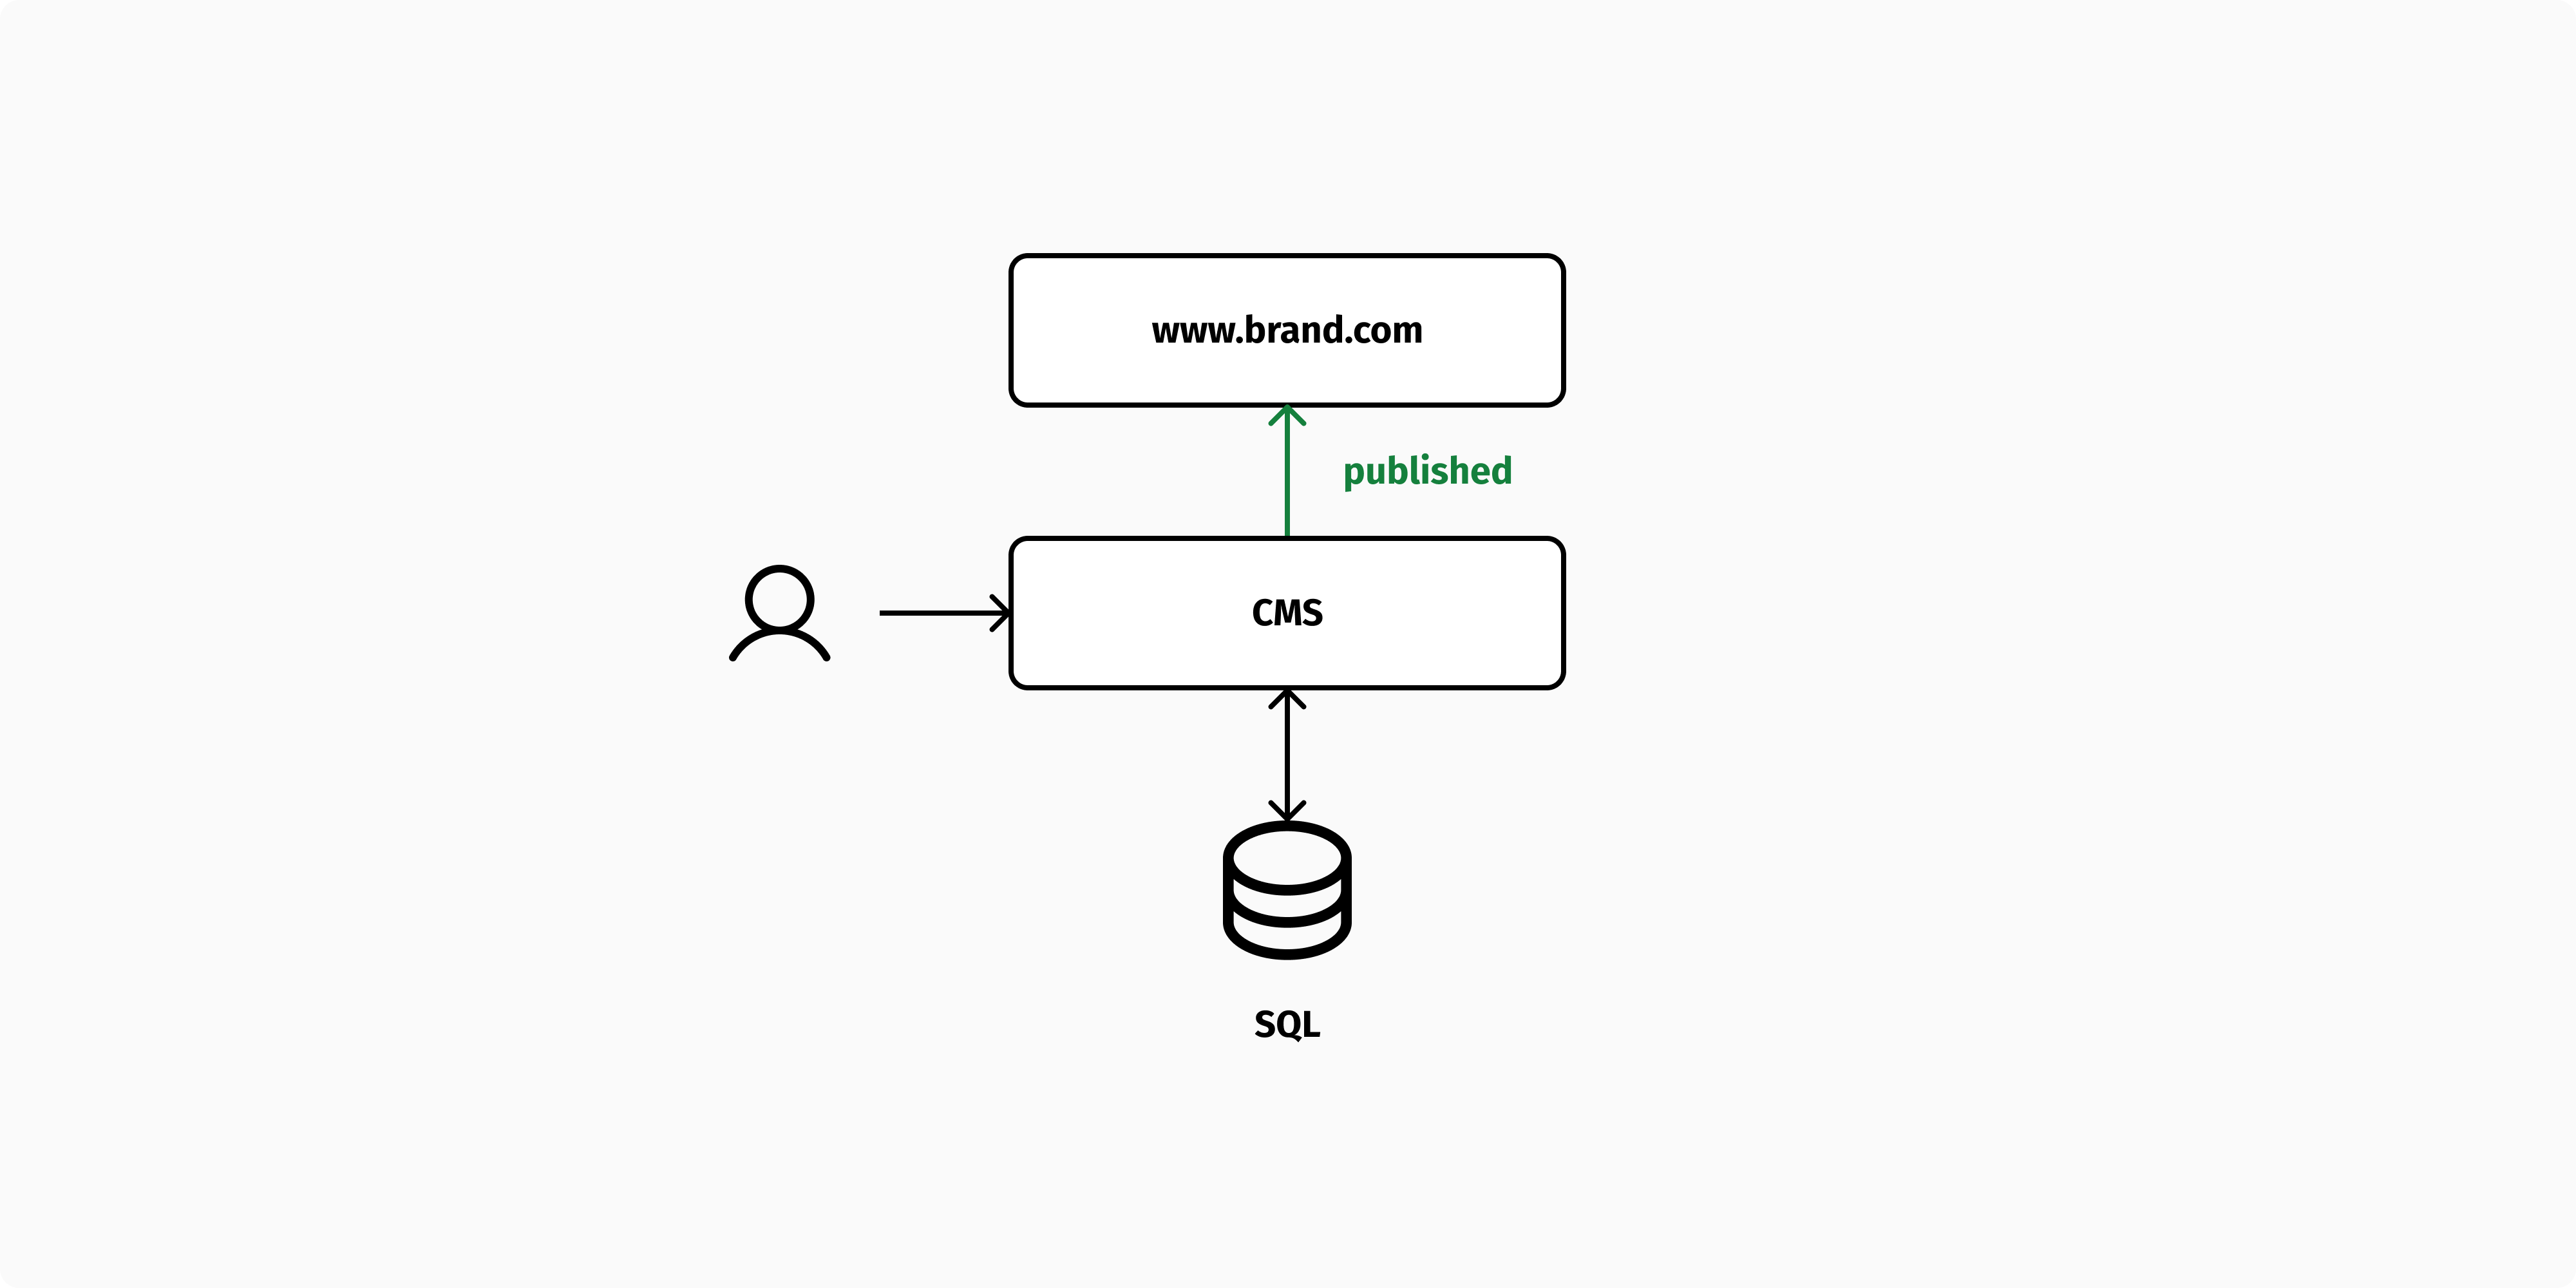 Content is published logically with a single-stack CMS.